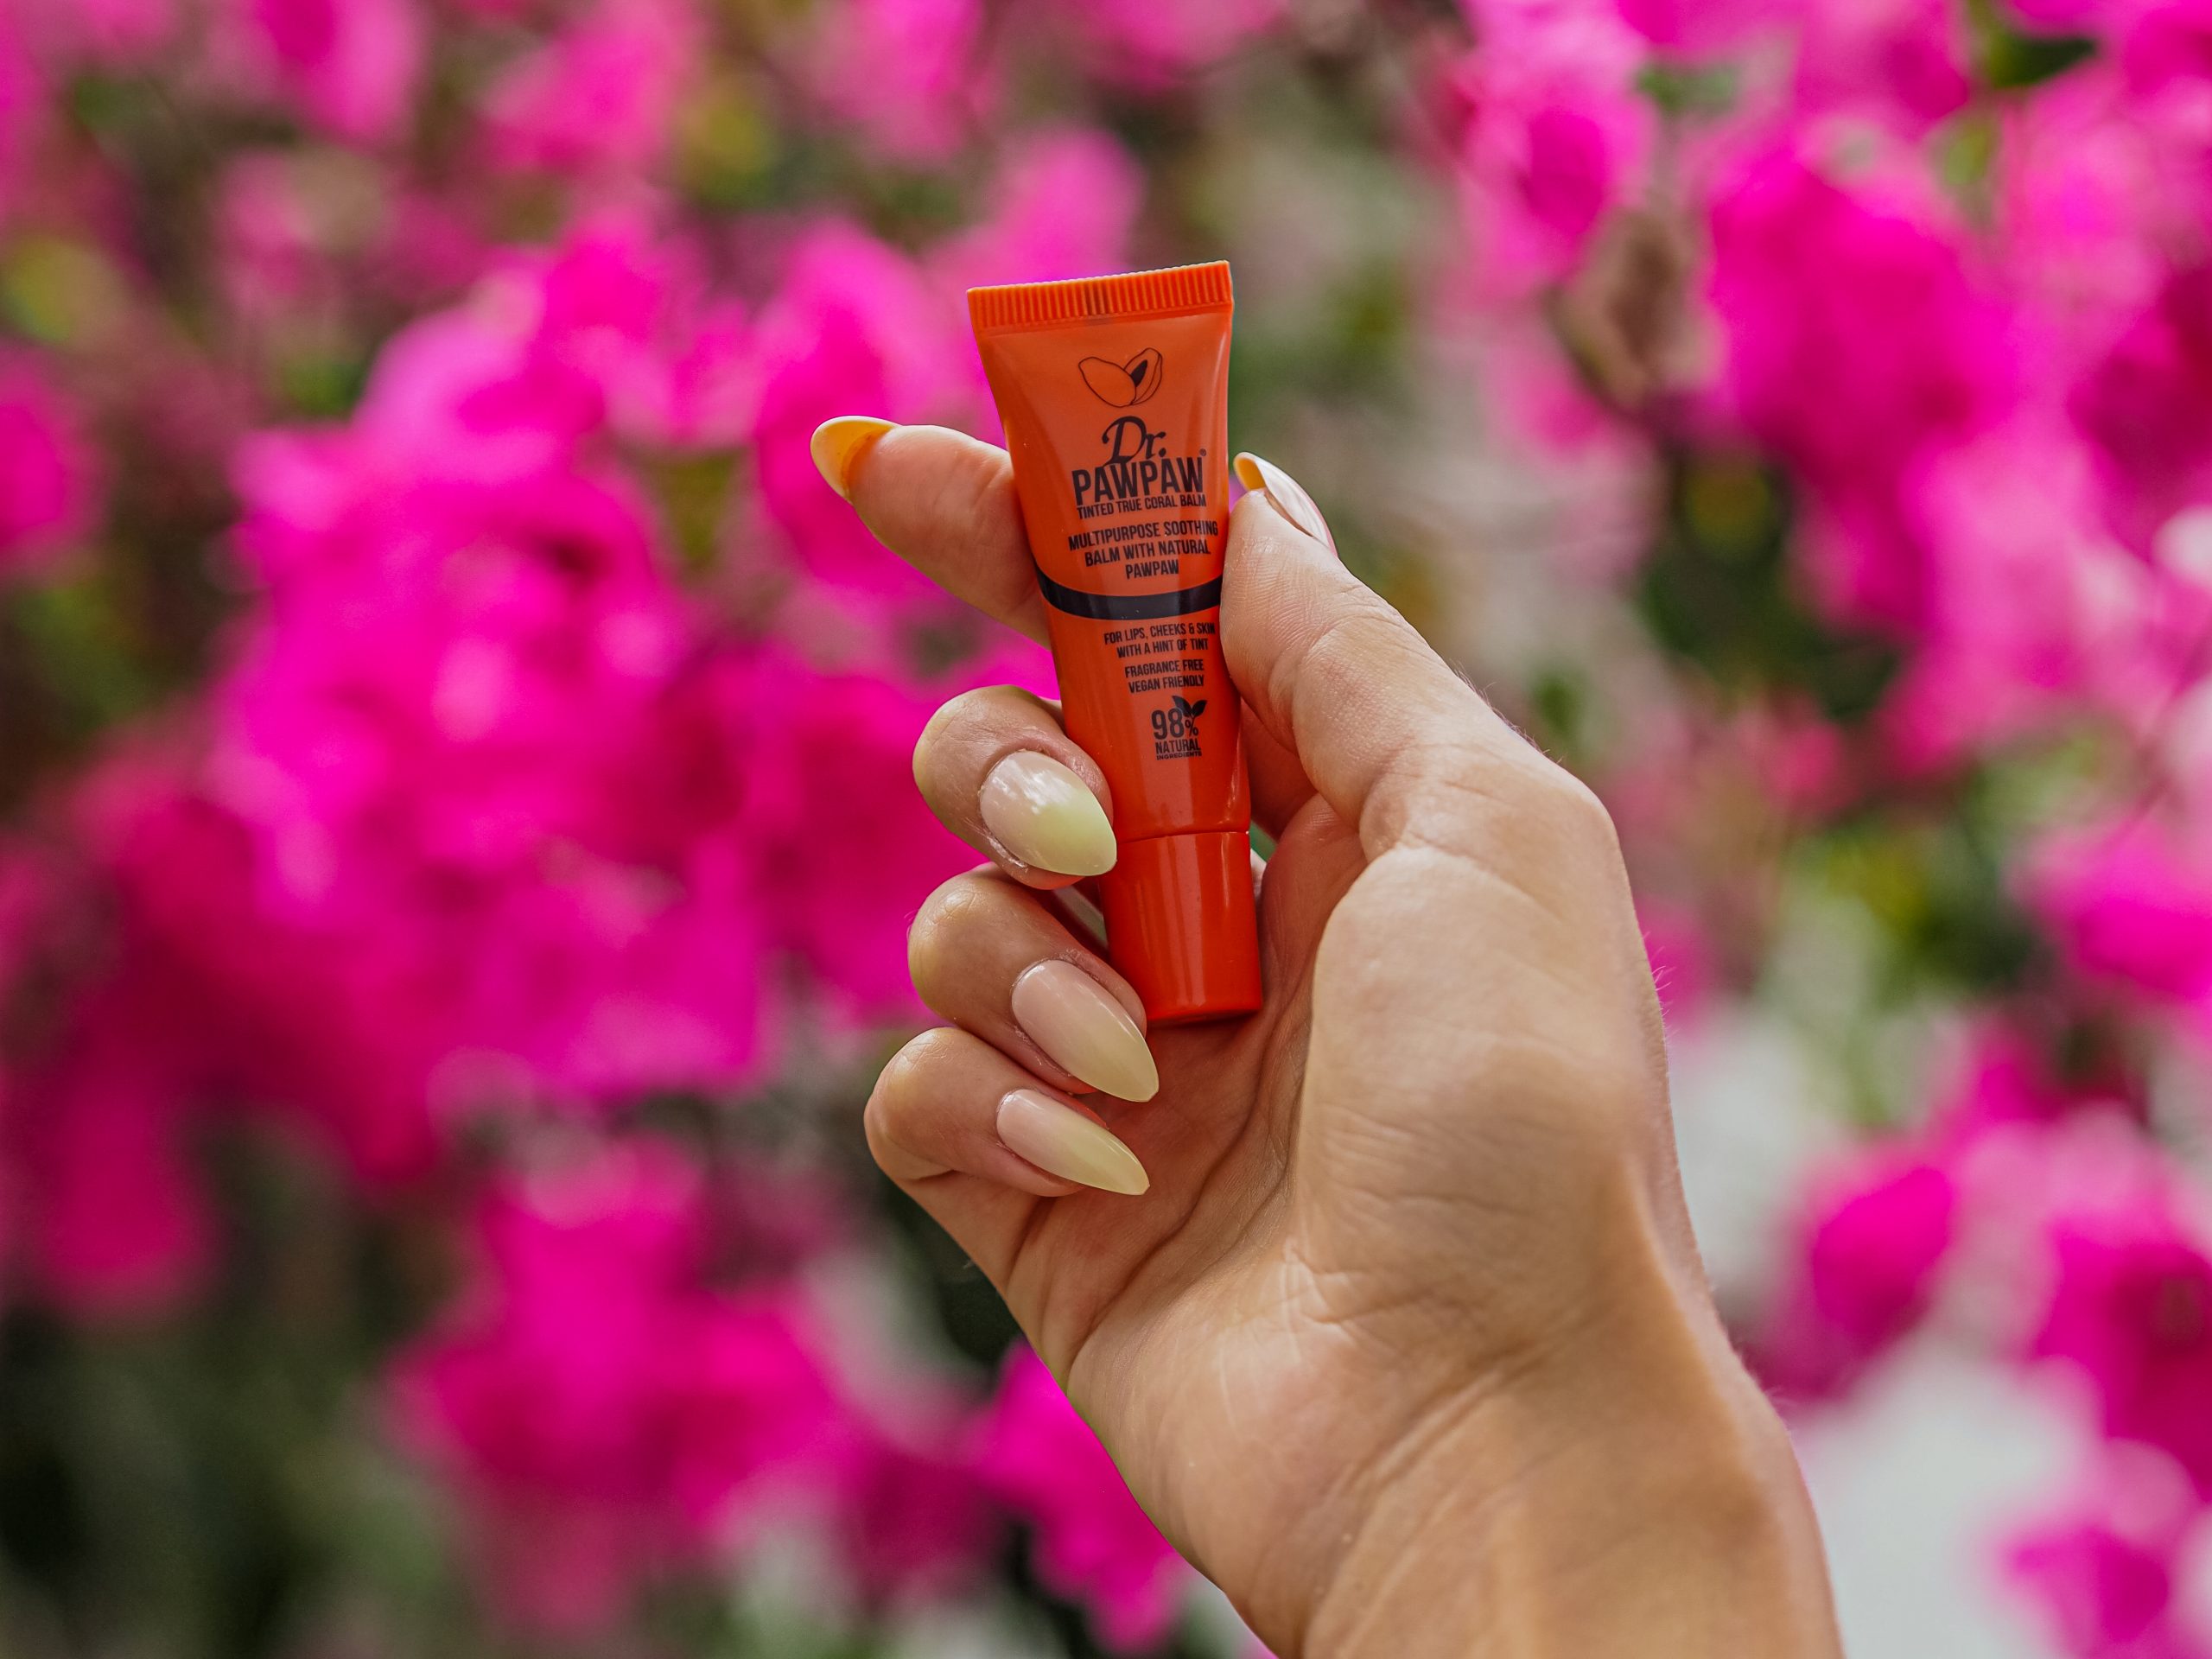 Laura Kate Lucas - Manchester Fashion, Travel and Beauty Blogger | Dr. PawPaw Tinted True Coral Balm